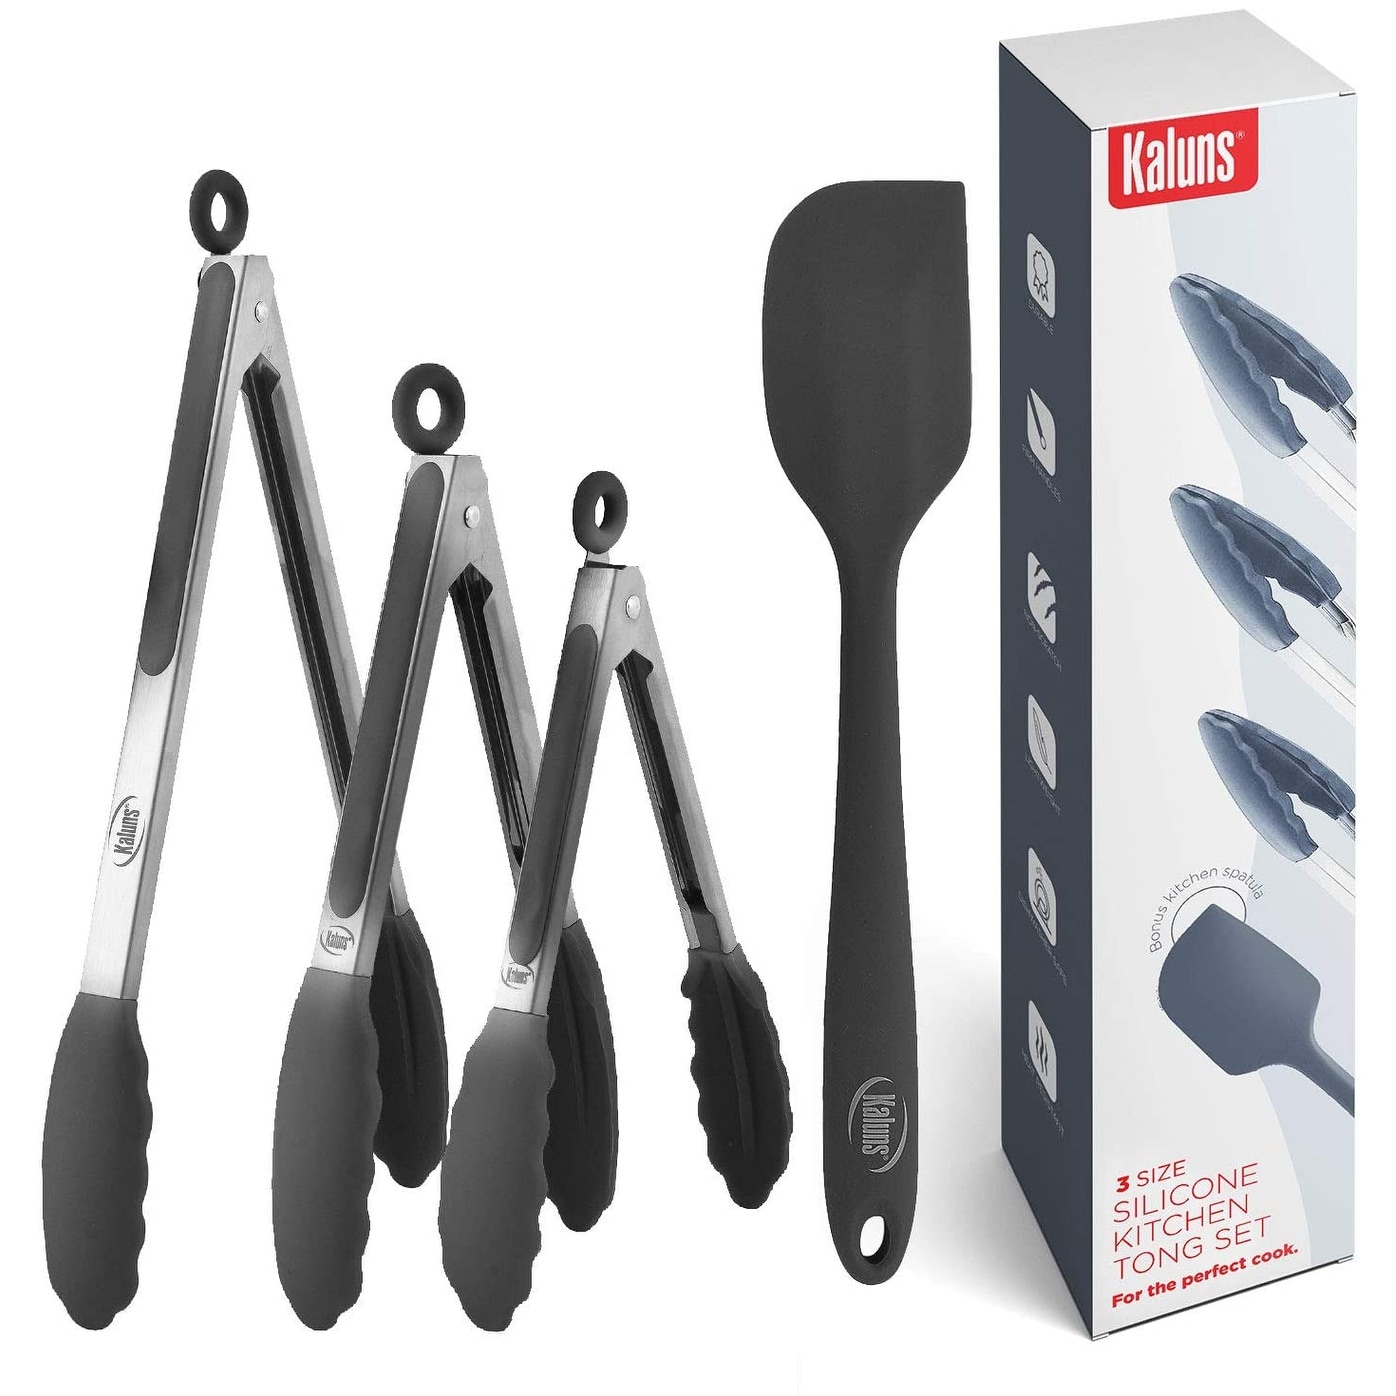 2-Piece Kitchen Tong Set, 9/12, Grey, Sold by at Home